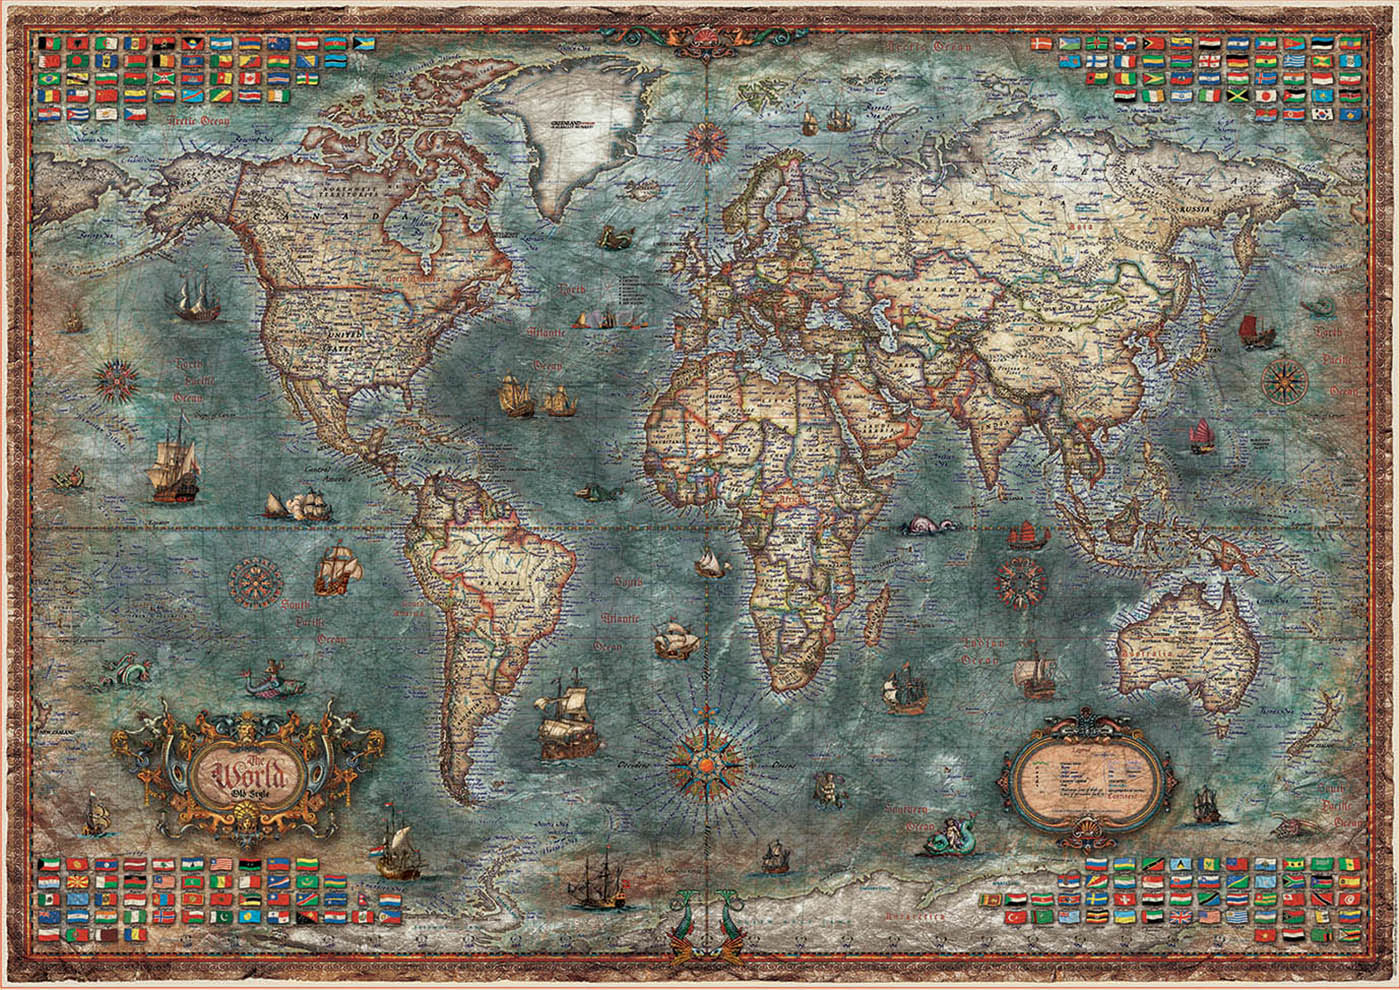 Educa - Pirates Map - 2000 Piece Jigsaw Puzzle - Puzzle Glue Included -  Completed Image Measures 37.75 x 26.75 - Ages 14+ (18008)